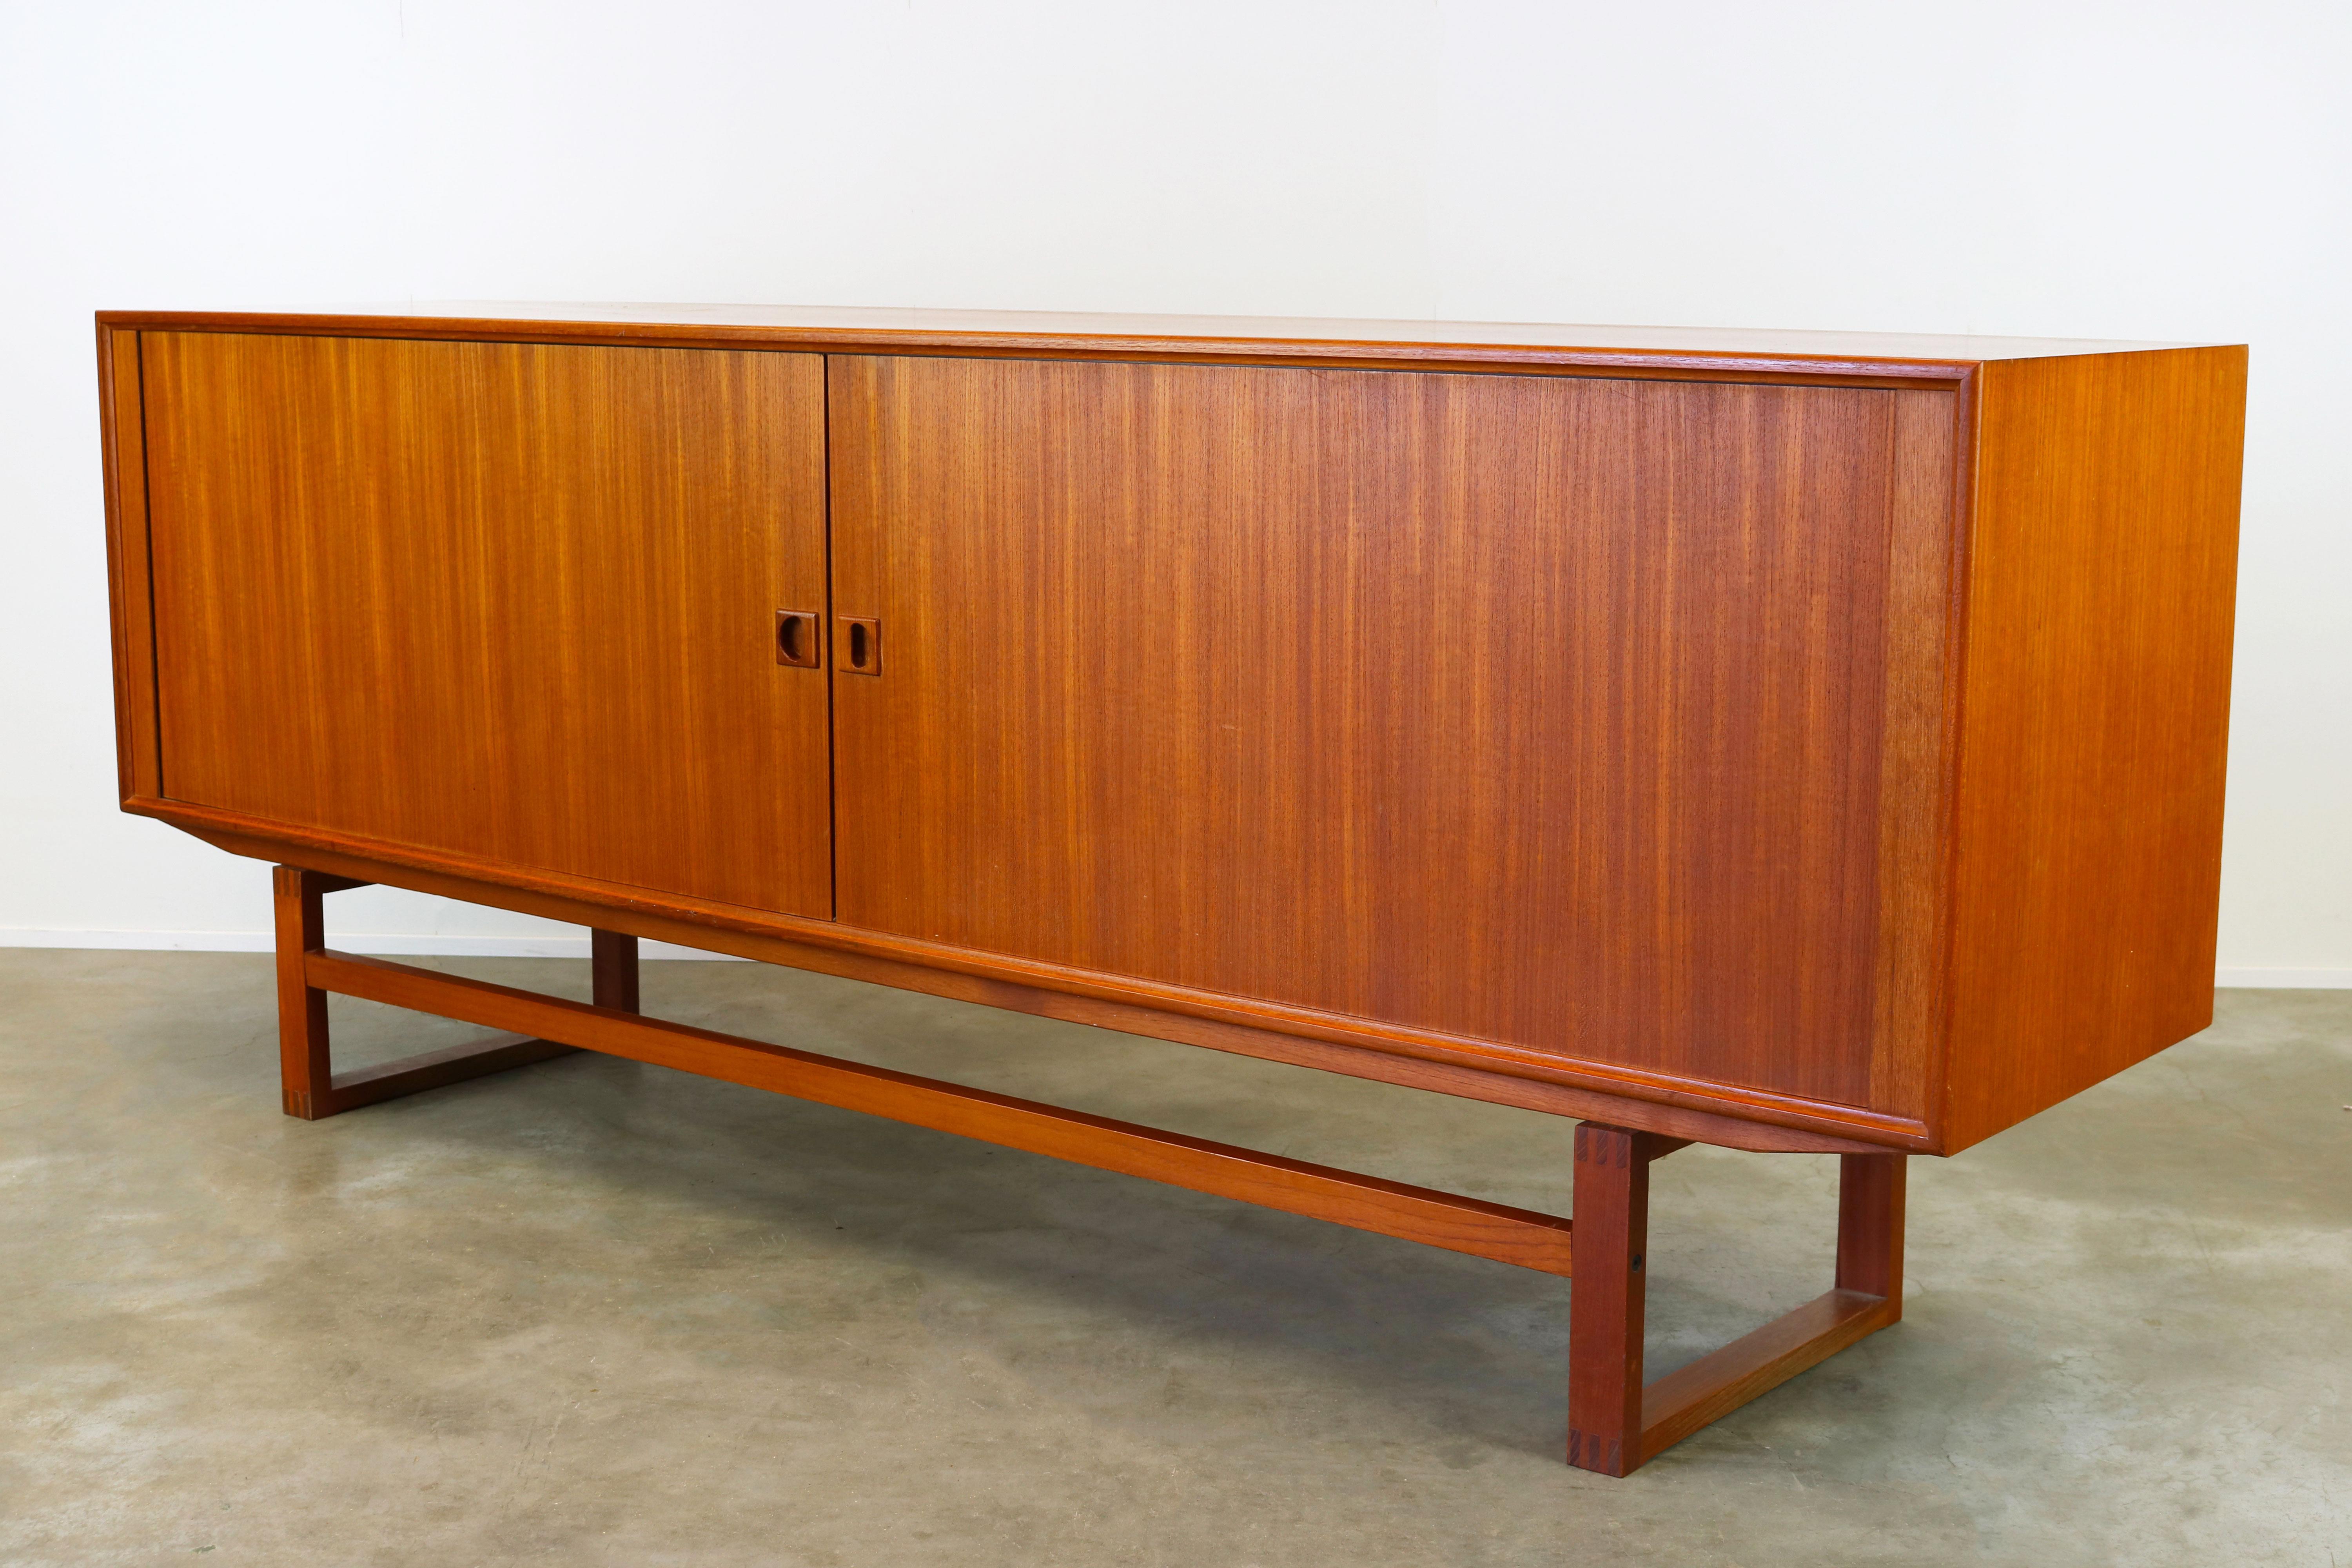 Wonderful Danish design sideboard designed by Axel Christenen for Aco Mobler in the 1950s. The sideboard is made from teak and has beautiful tambour doors who disappear completely when opened. Characteristic for this sideboard is the square base